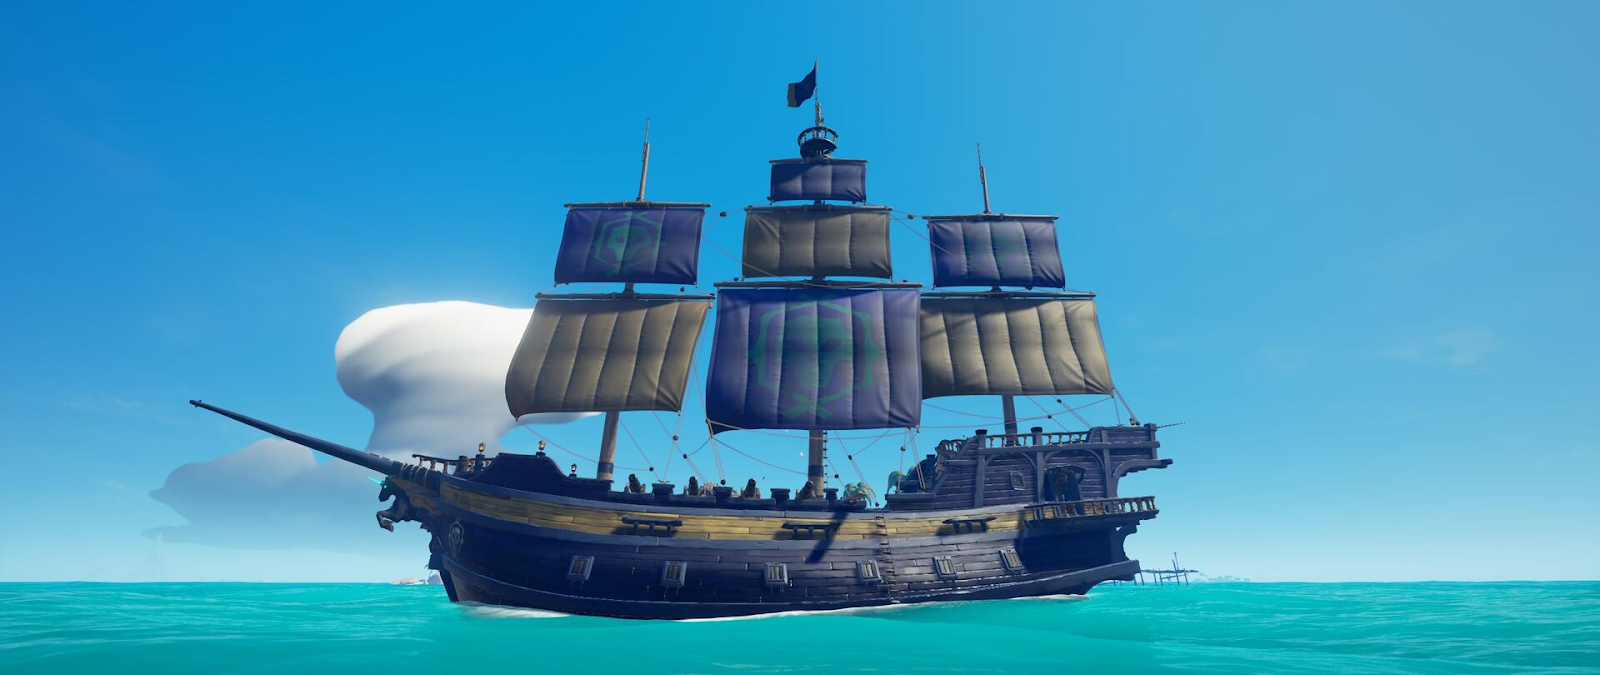 An image of the ship cosmetics from the Legendary cosmetics set from the game Sea of Thieves. 